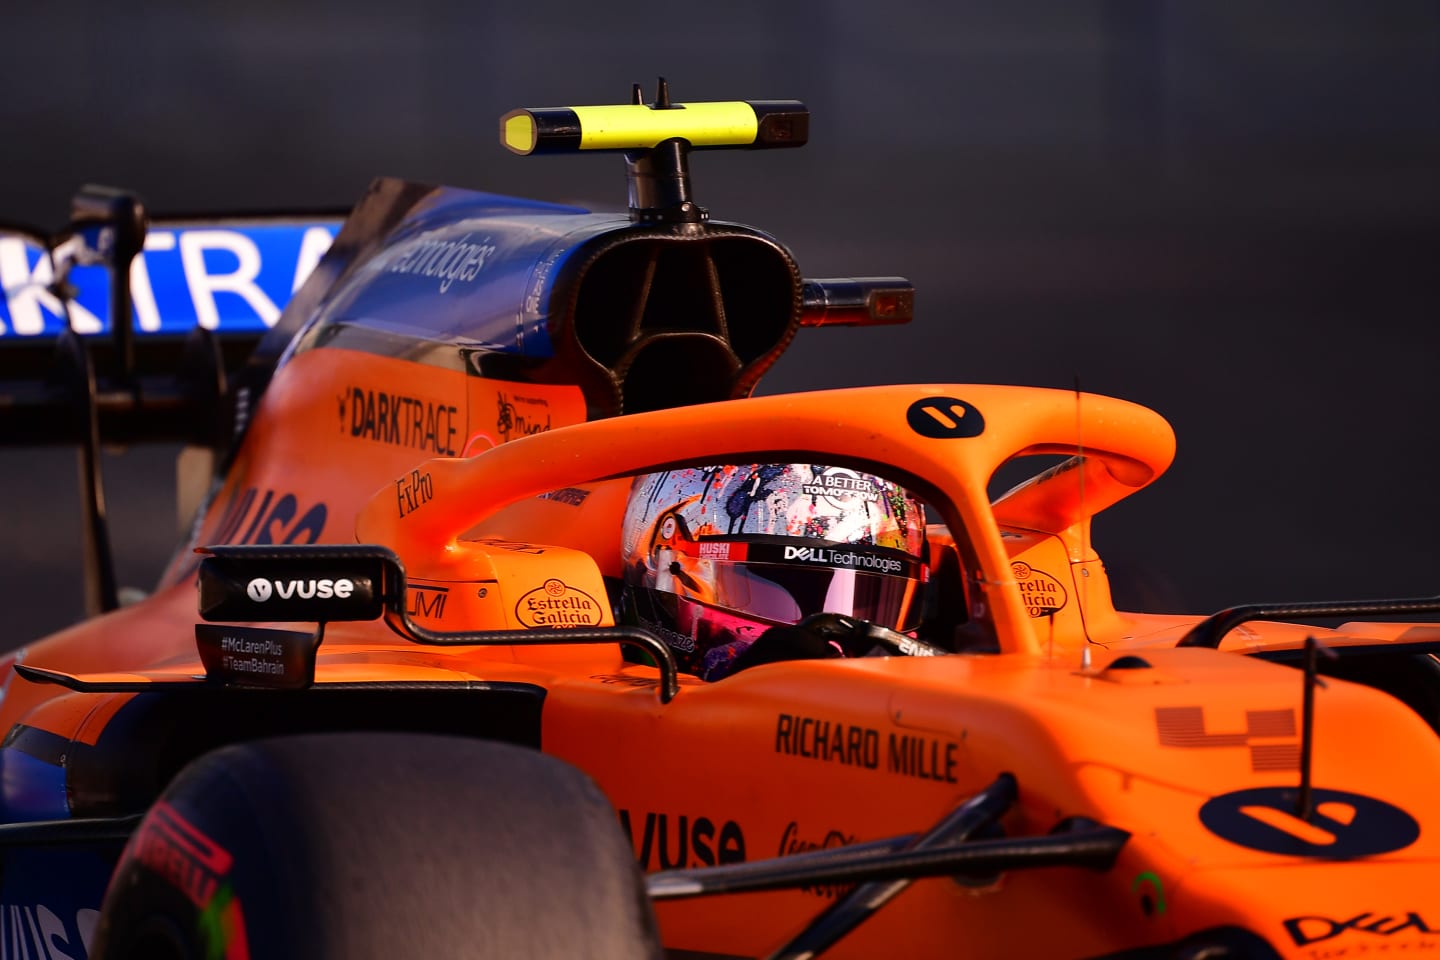 ABU DHABI, UNITED ARAB EMIRATES - DECEMBER 12: Lando Norris of Great Britain driving the (4) McLaren F1 Team MCL35 Renault on track during final practice ahead of the F1 Grand Prix of Abu Dhabi at Yas Marina Circuit on December 12, 2020 in Abu Dhabi, United Arab Emirates. (Photo by Giuseppe Cacace - Pool/Getty Images)